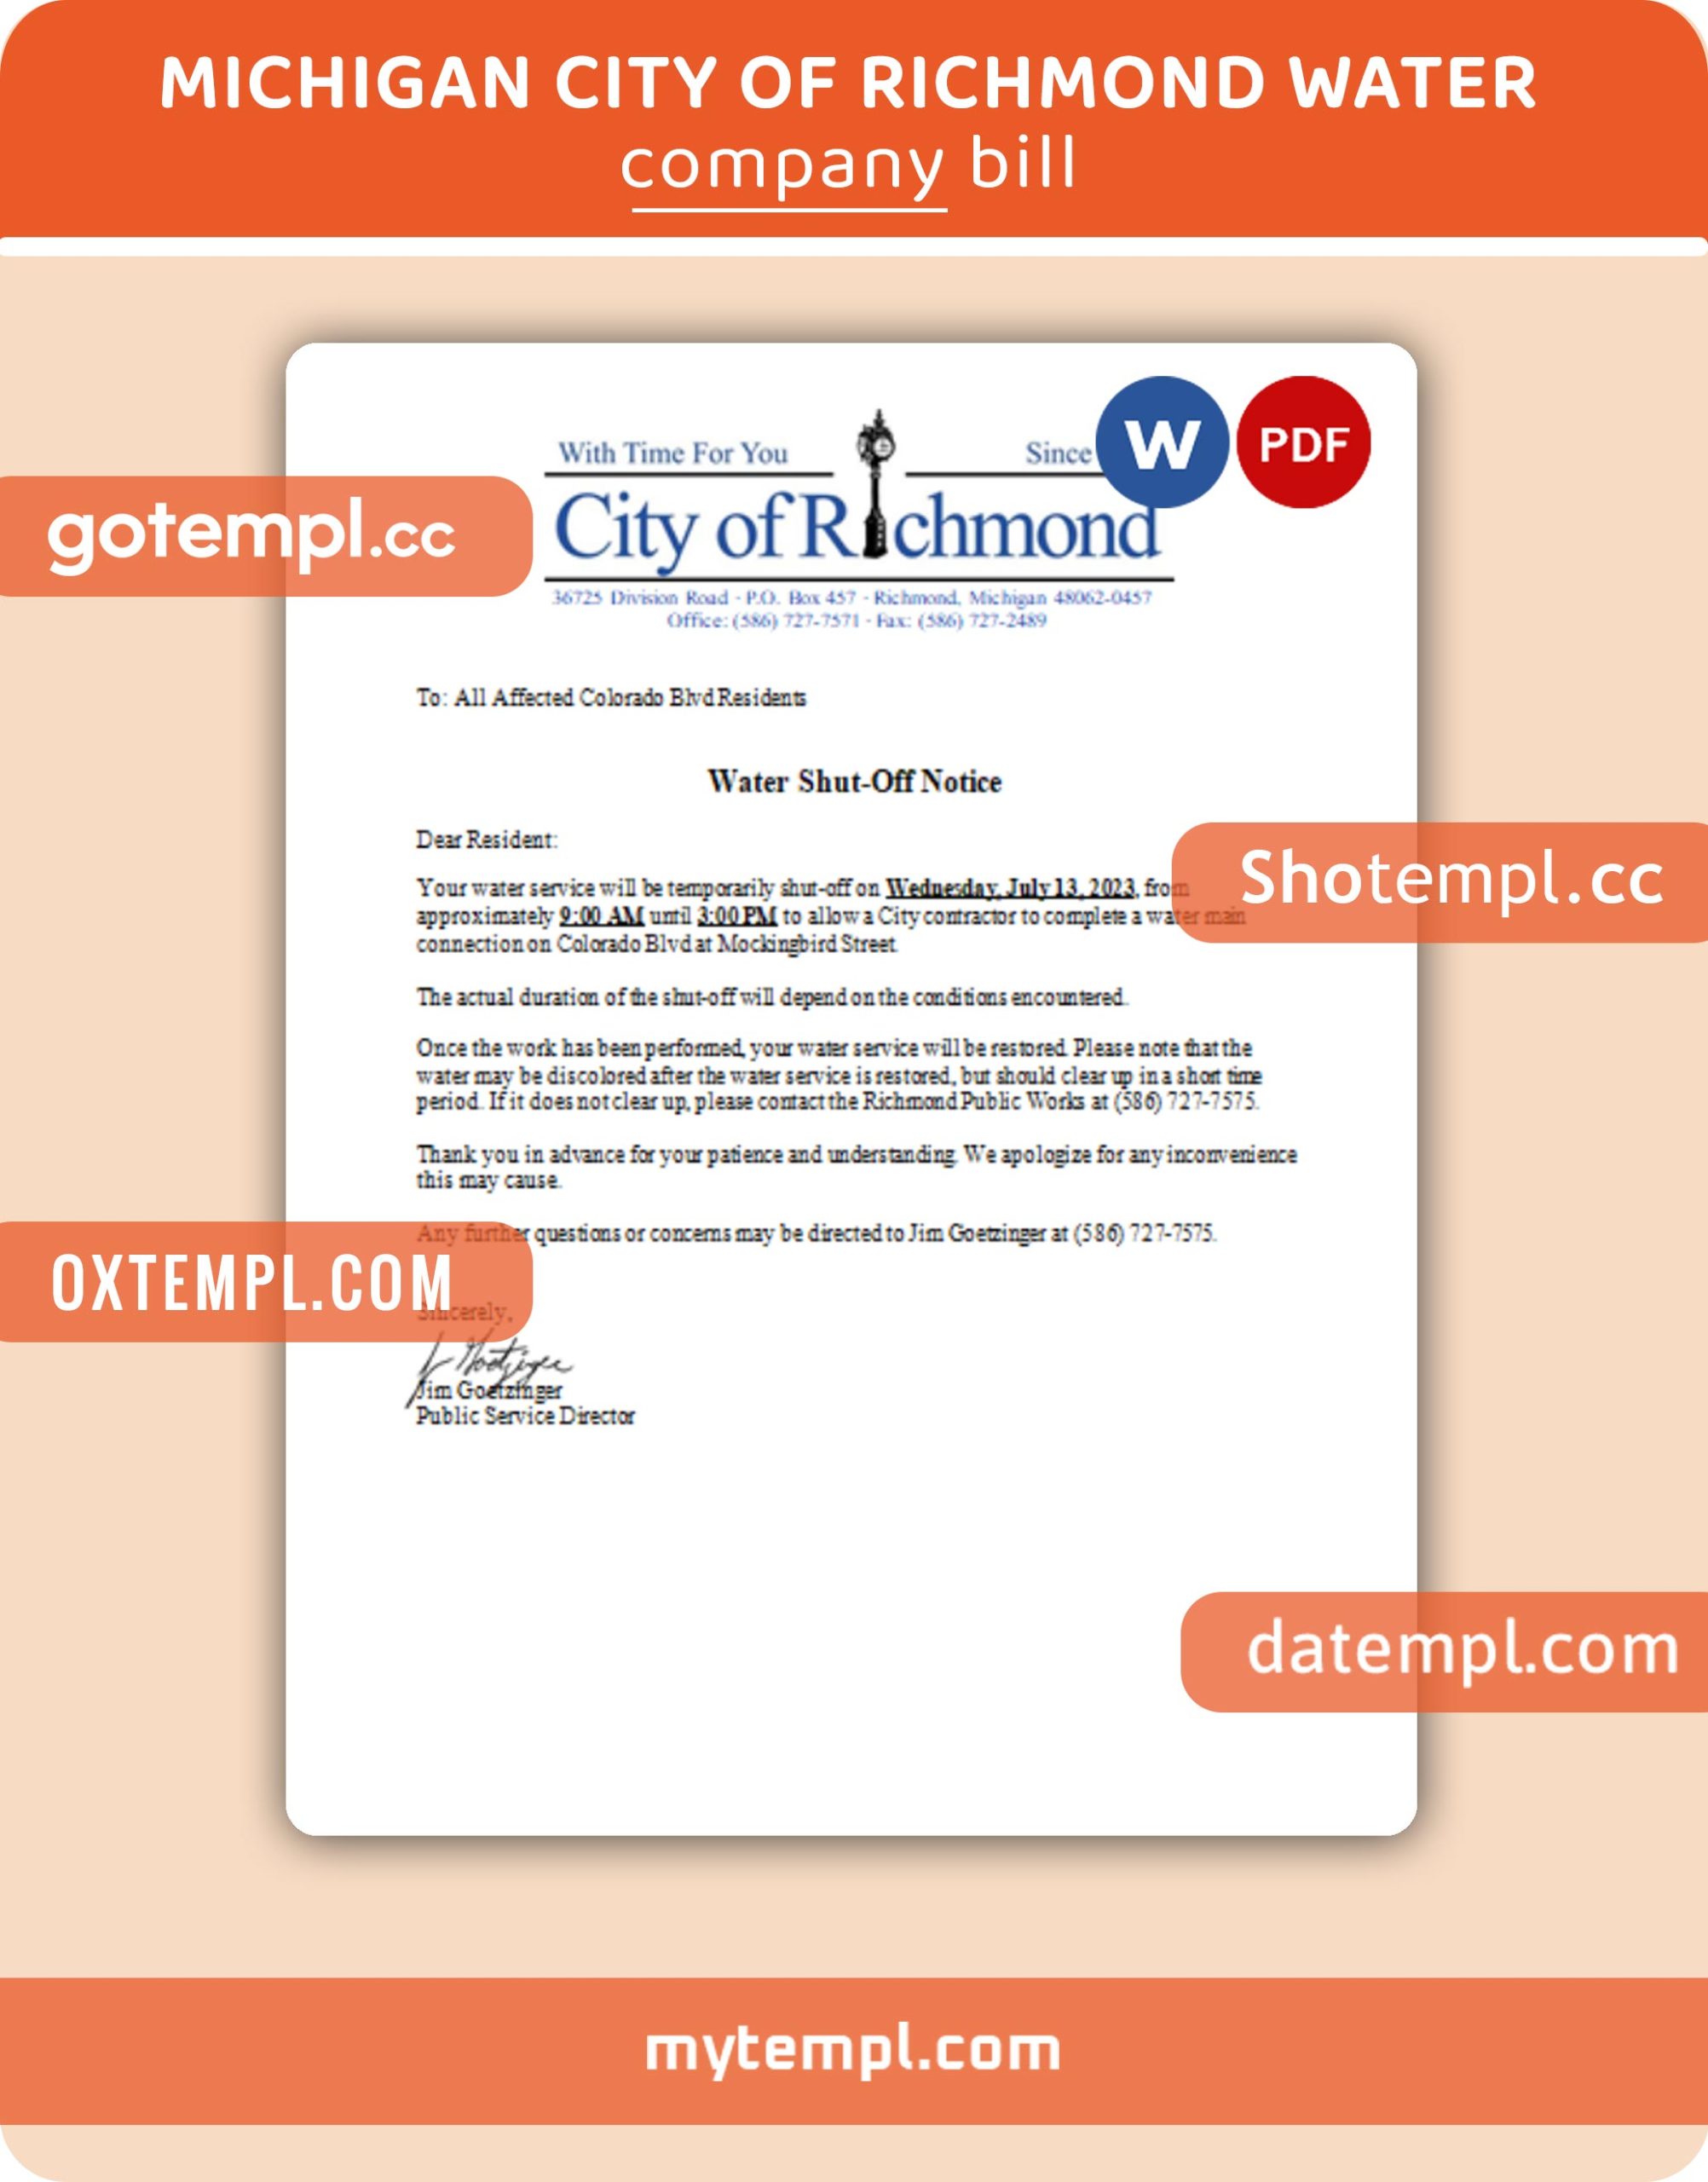 Michigan City of Richmond water shut off notice business utility bill, PDF and WORD template